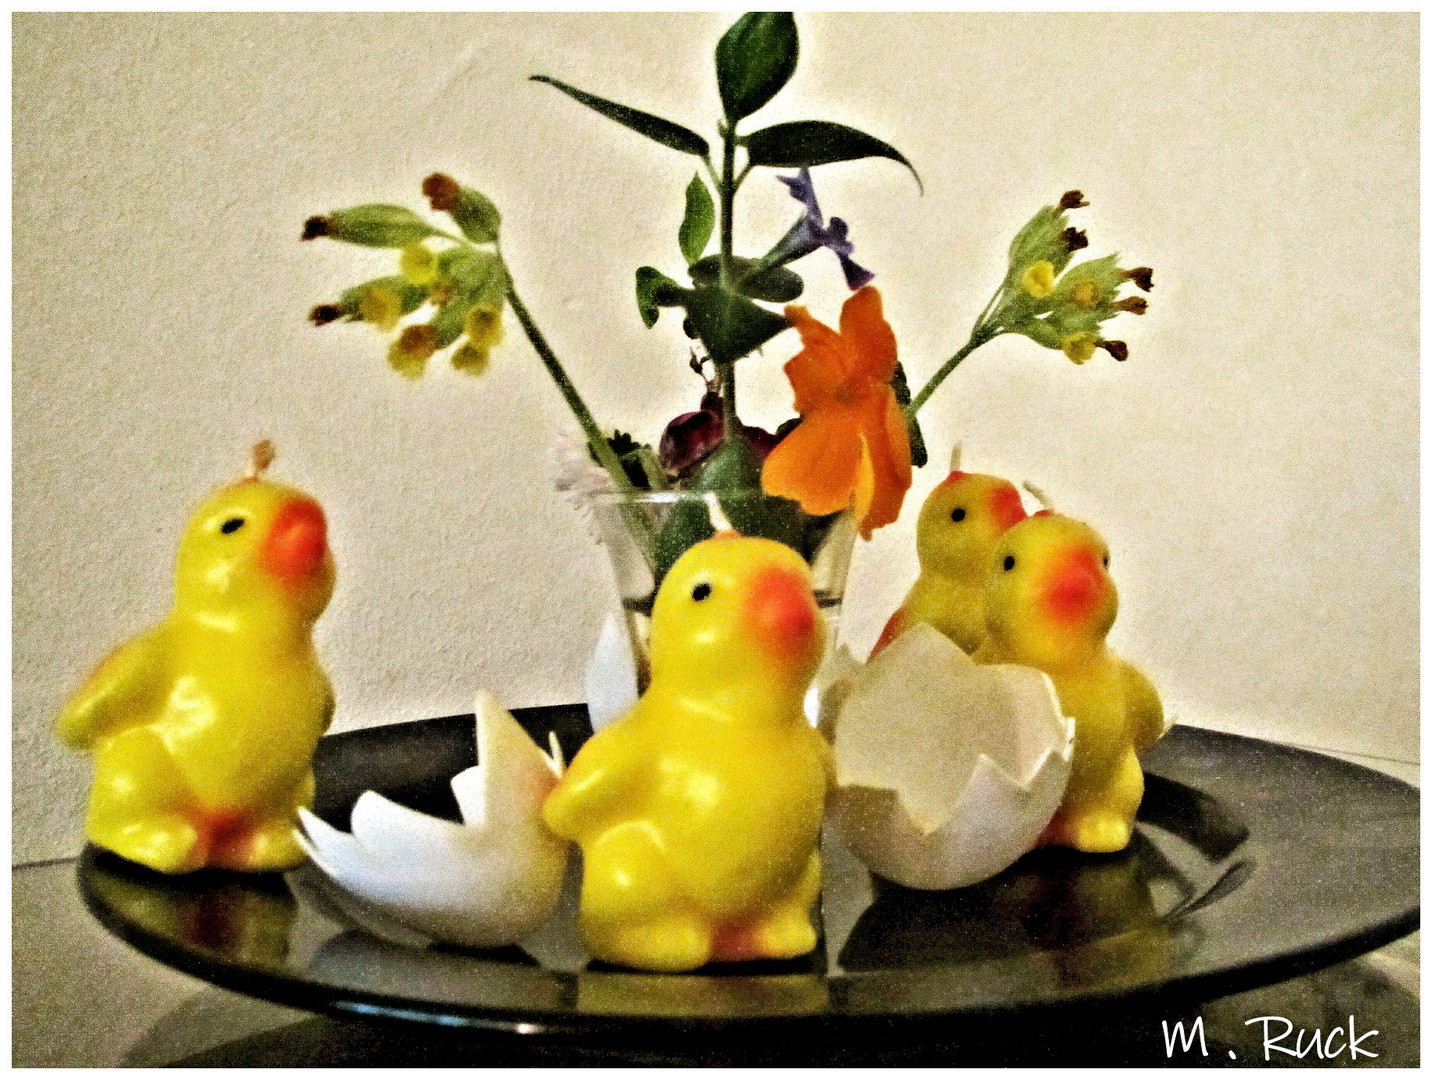 Frohe Ostern !